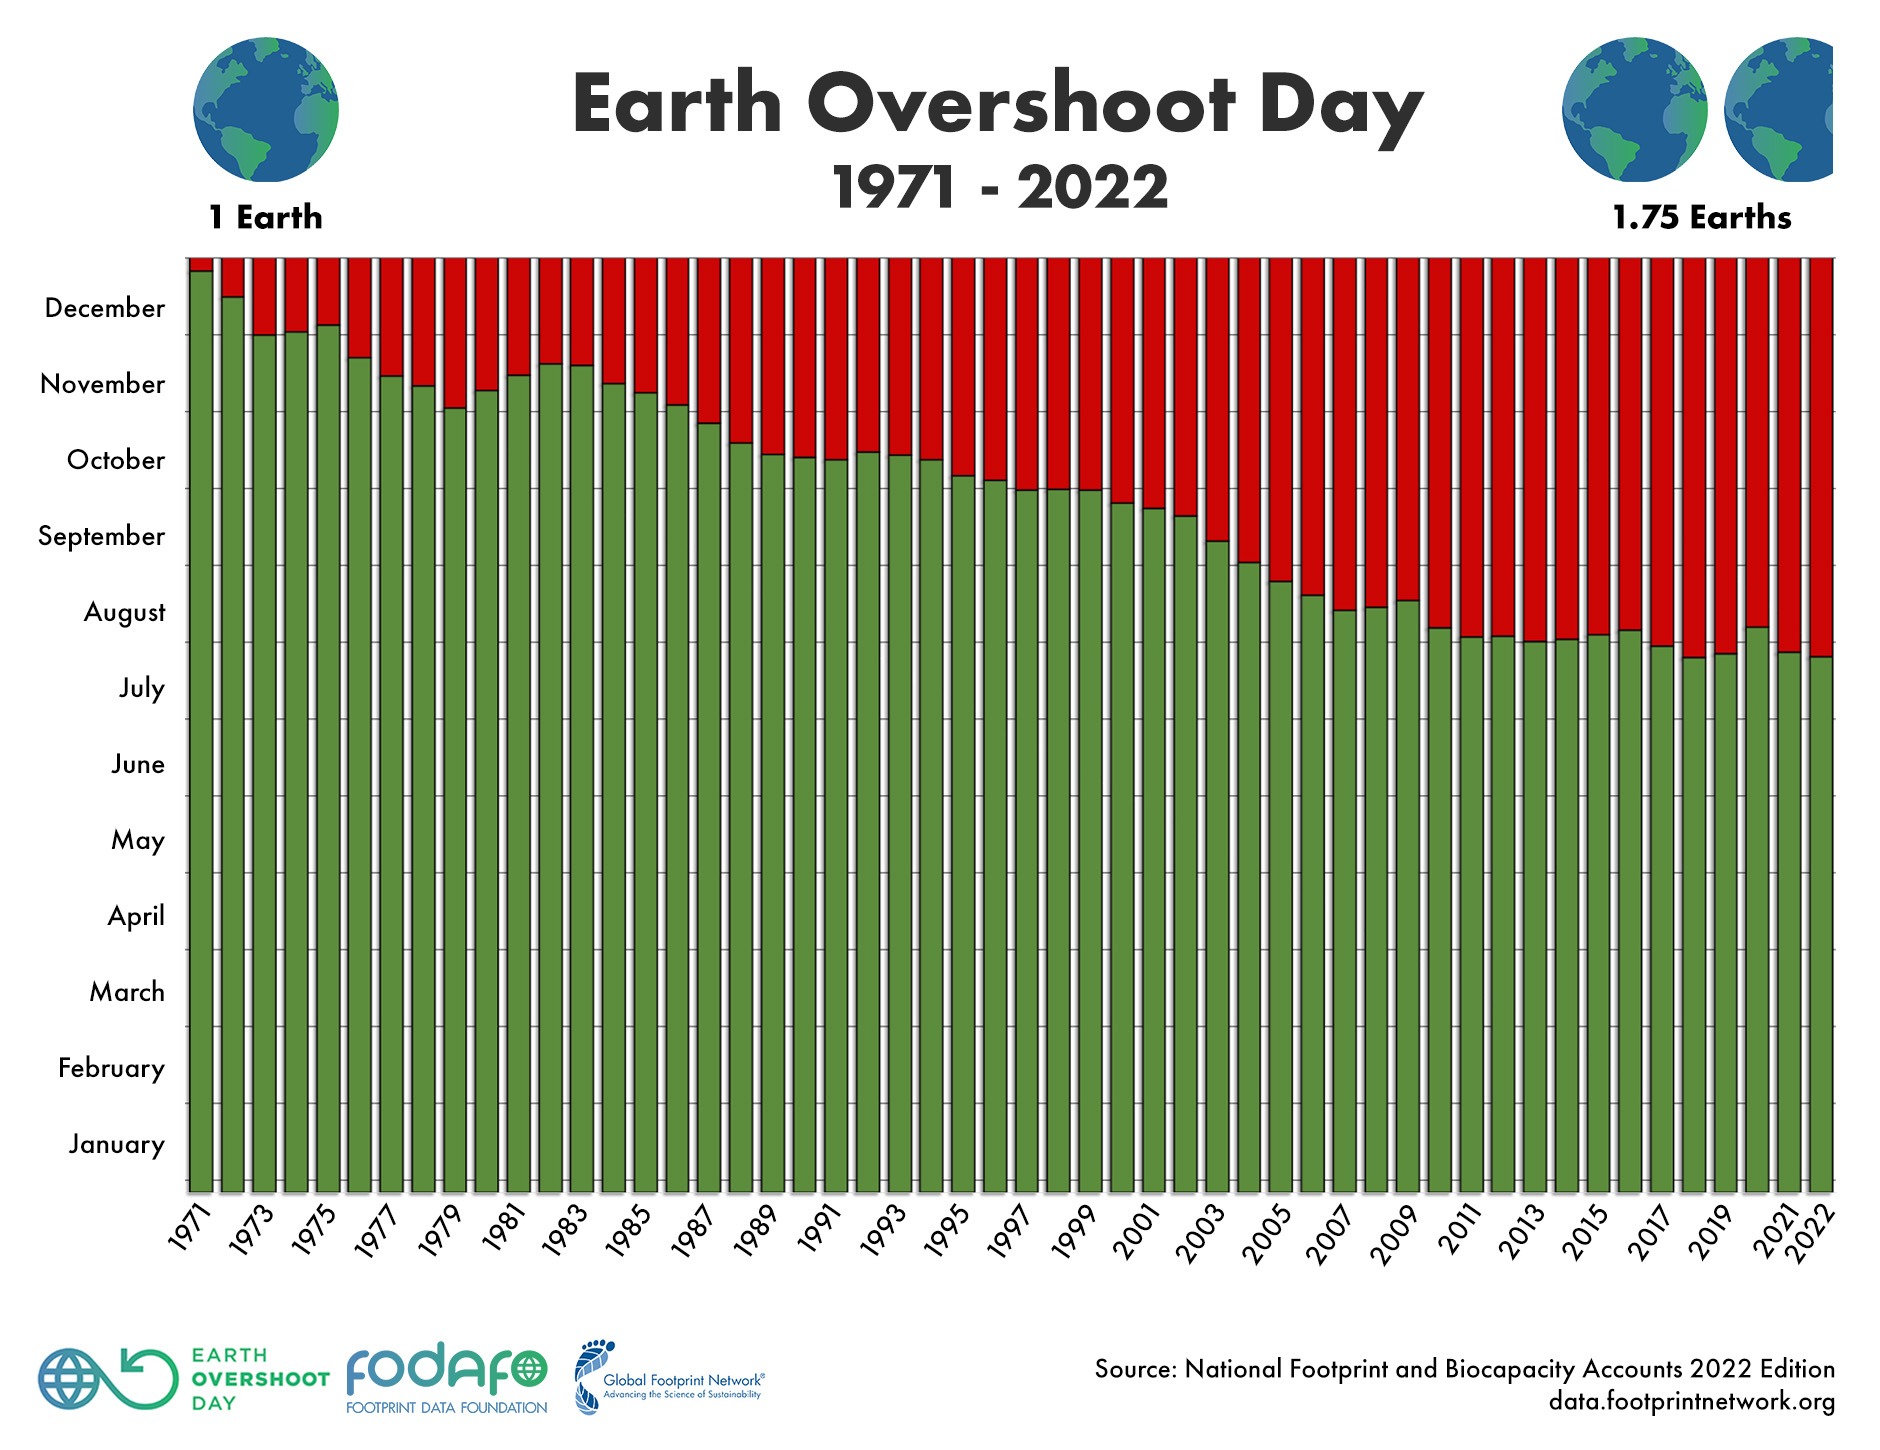 Earth Overshoot Day Alarm bells ring as we race through resources